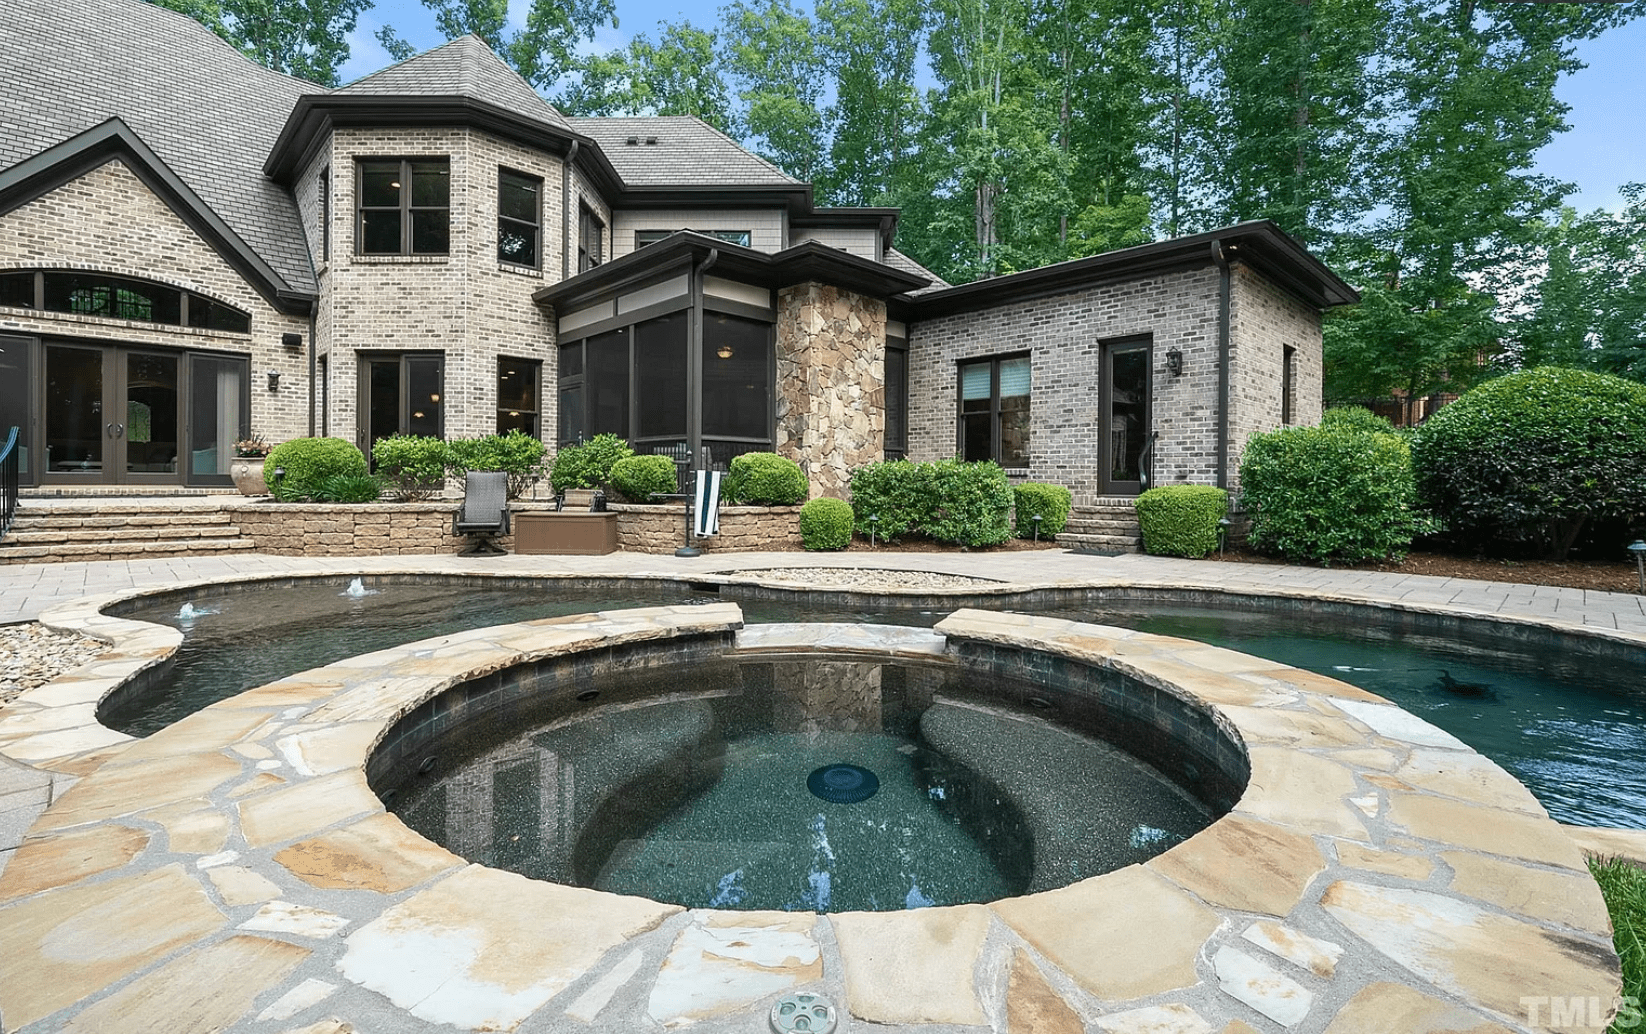 A stunning gray brick home with a deep teal swimming pool with spa and green landscaping